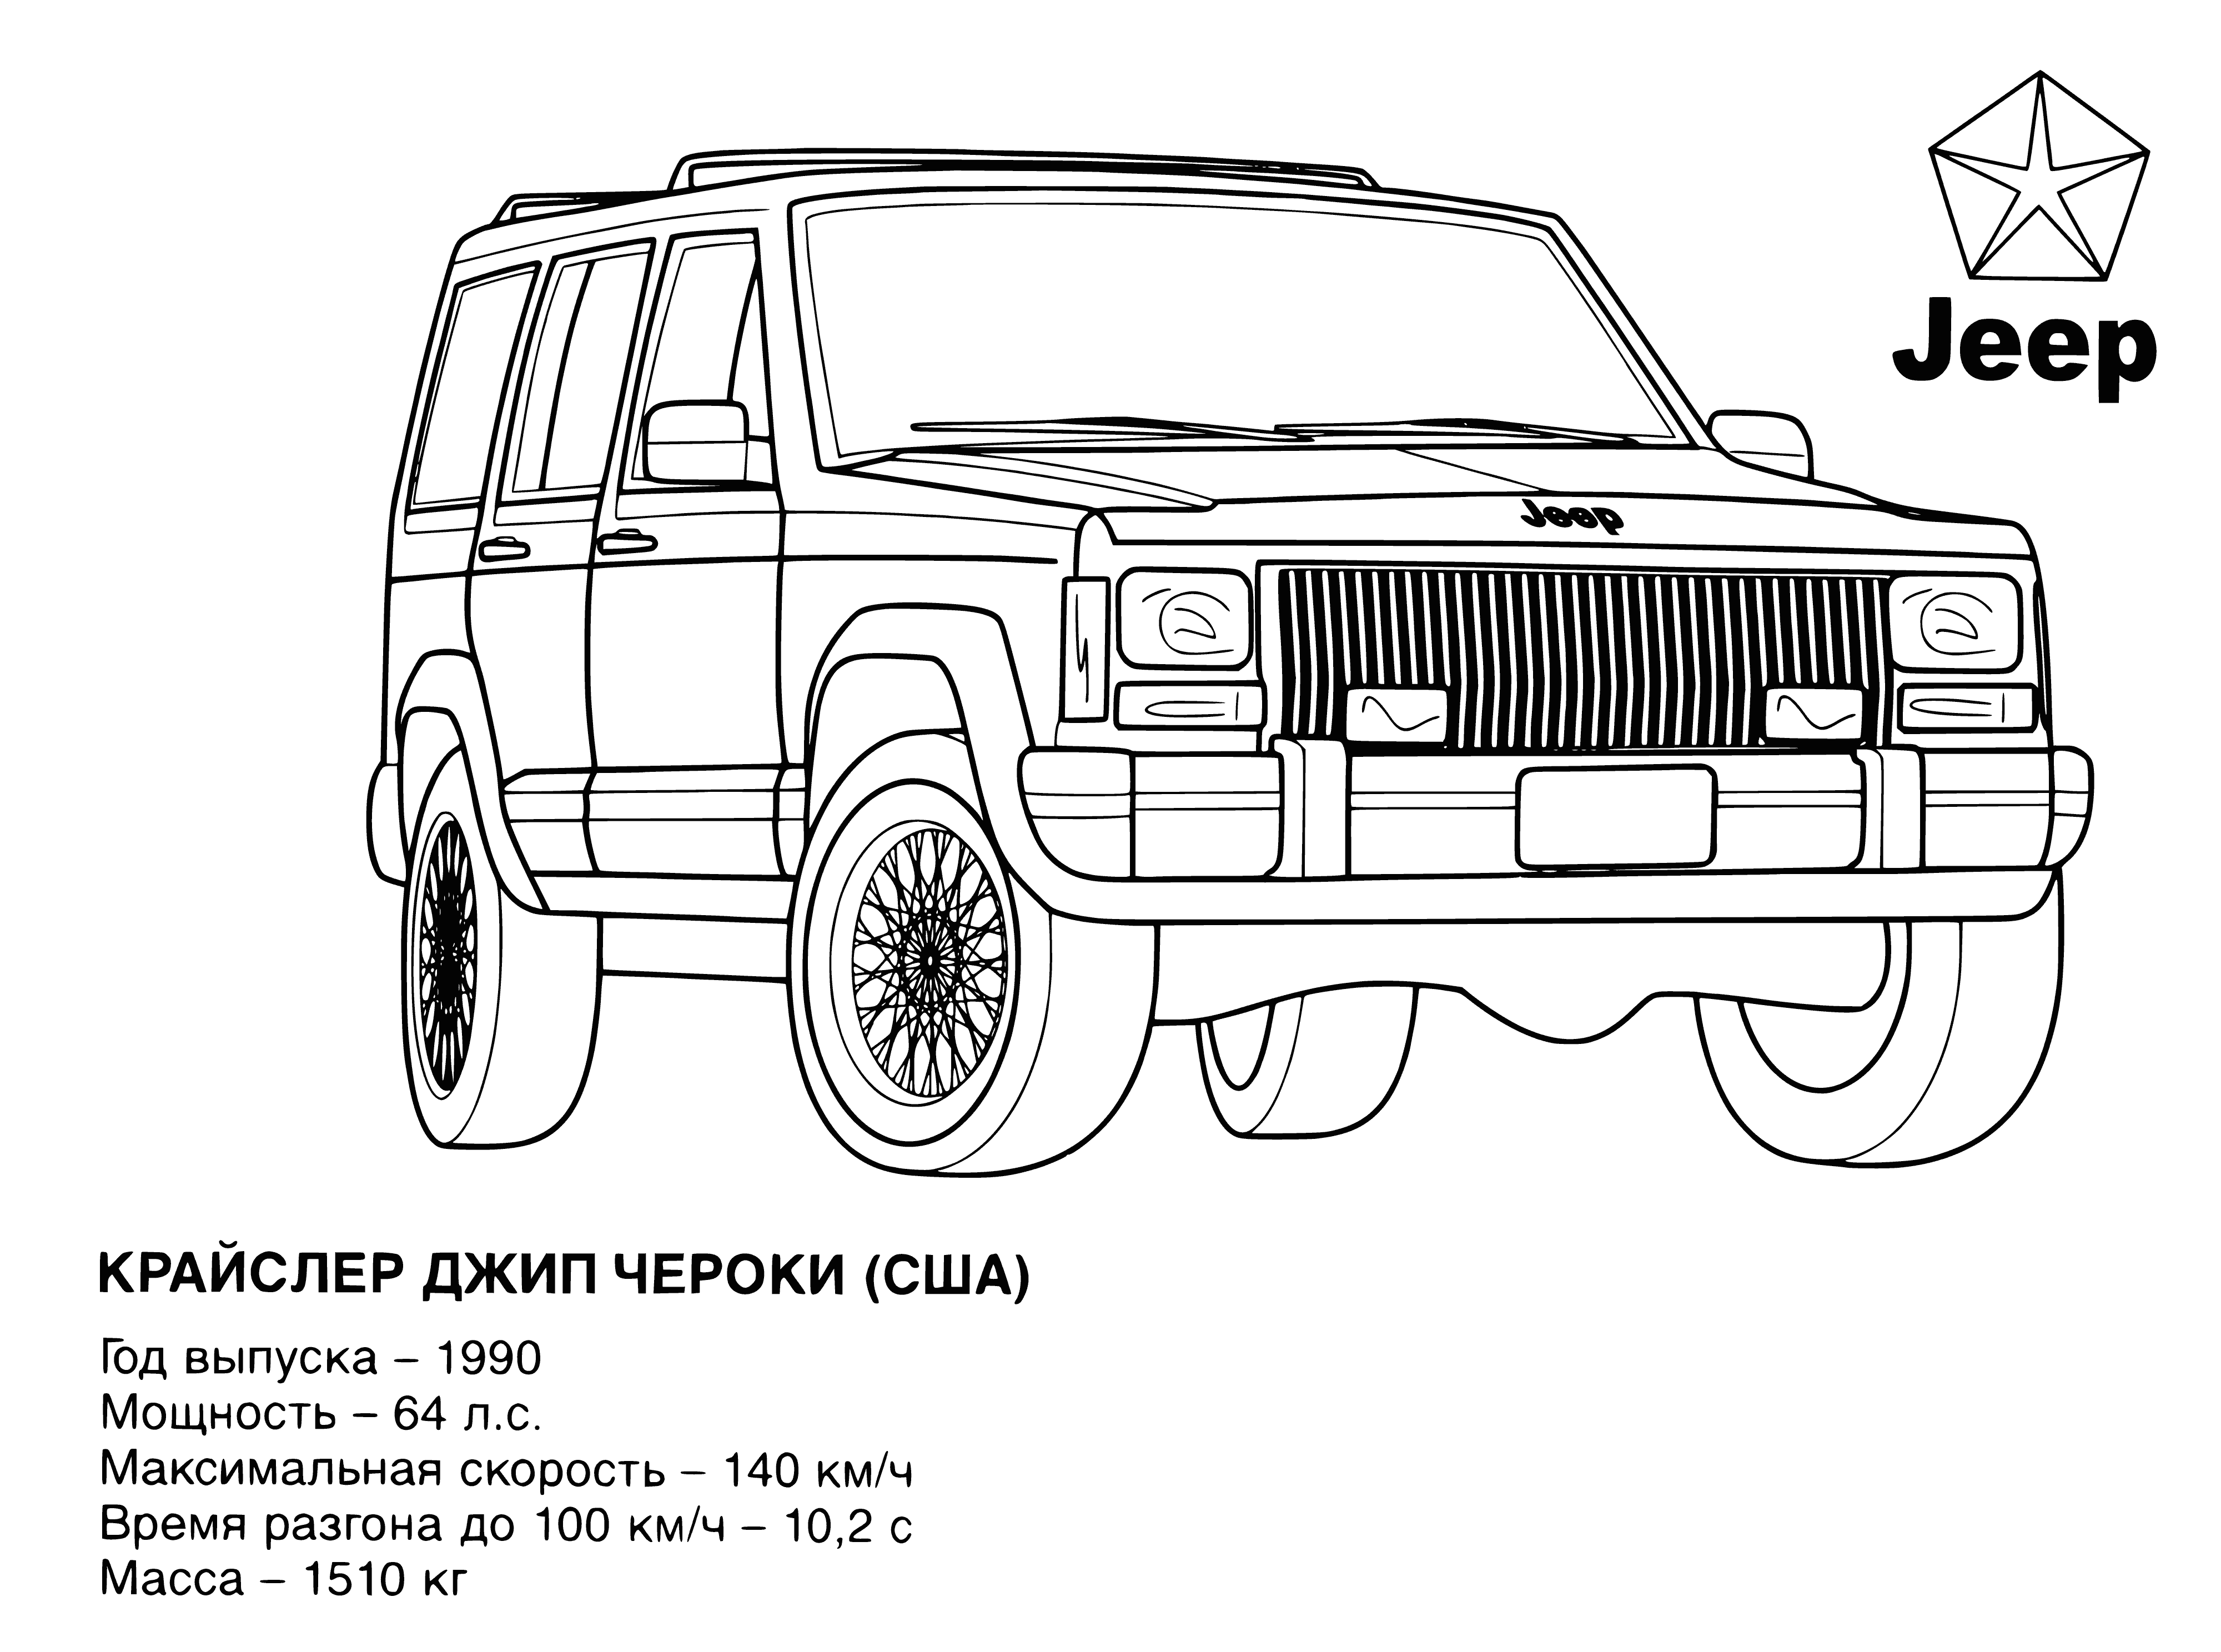 coloring page: People in multi-colored jeeps in a parking lot - all same model - perfect coloring page! #coloringbook